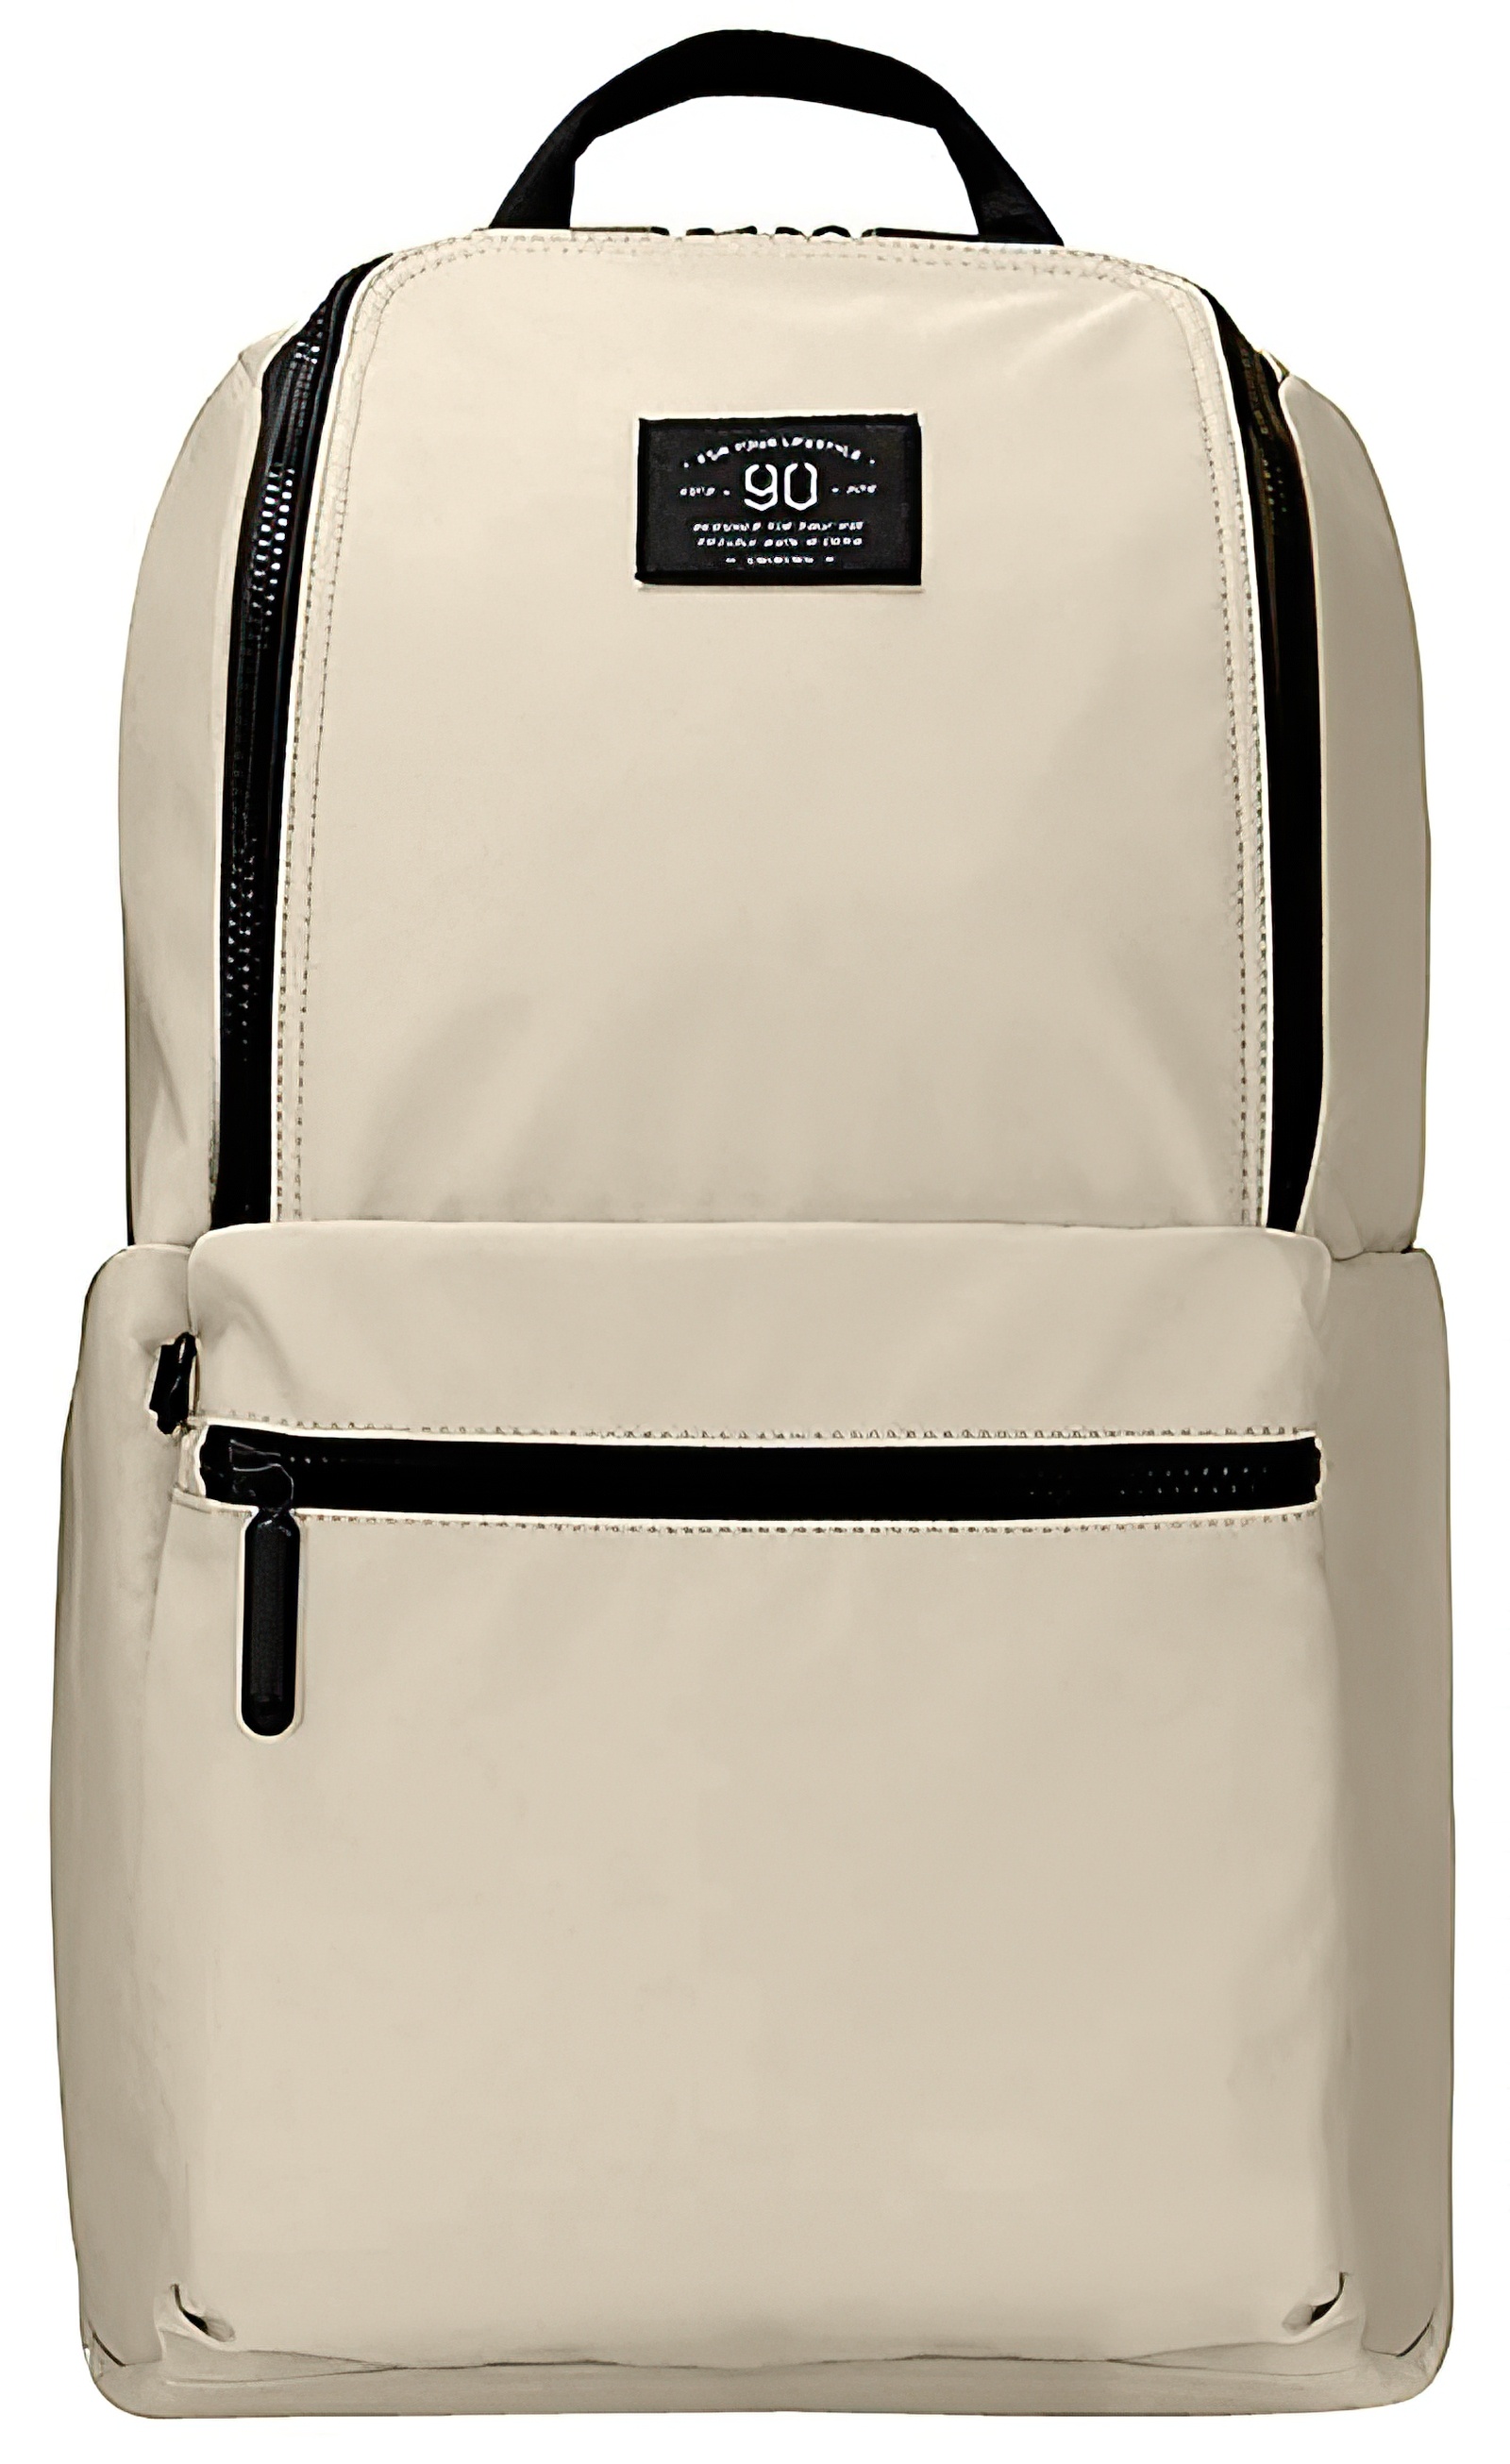 Xiaomi 90 Points Pro Leisure Travel Backpack 10L Beige КАРКАМ